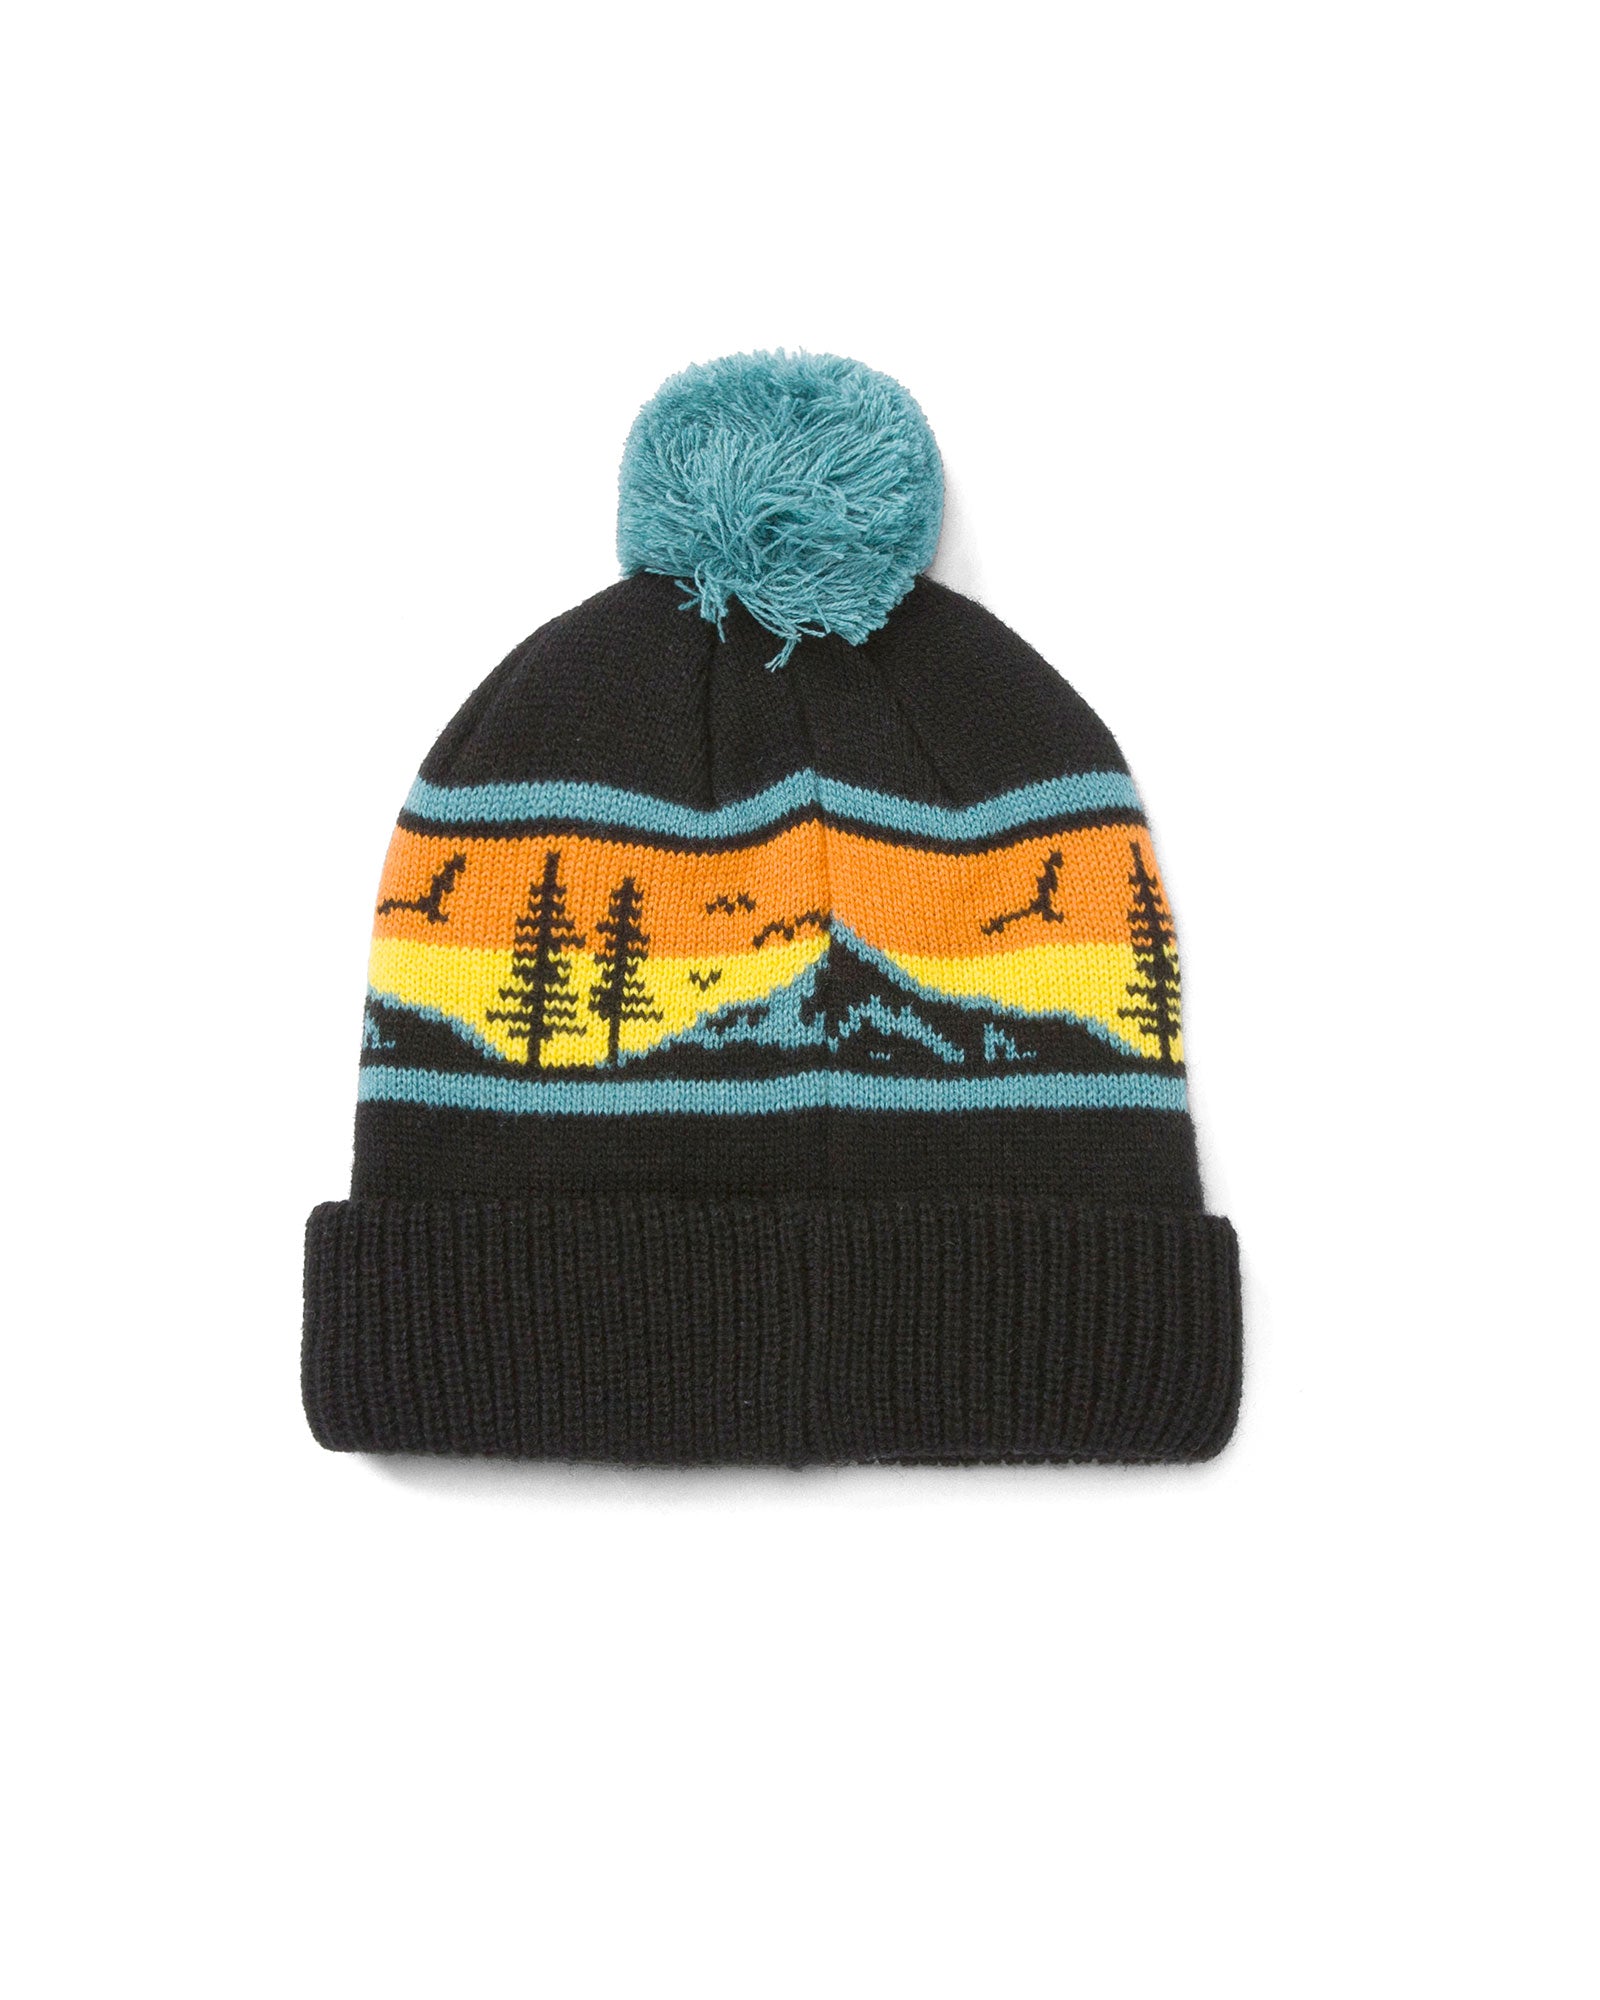 Tahoe – Inspired Spirit Parks Tahoe Lake Beanie Project Knitted By